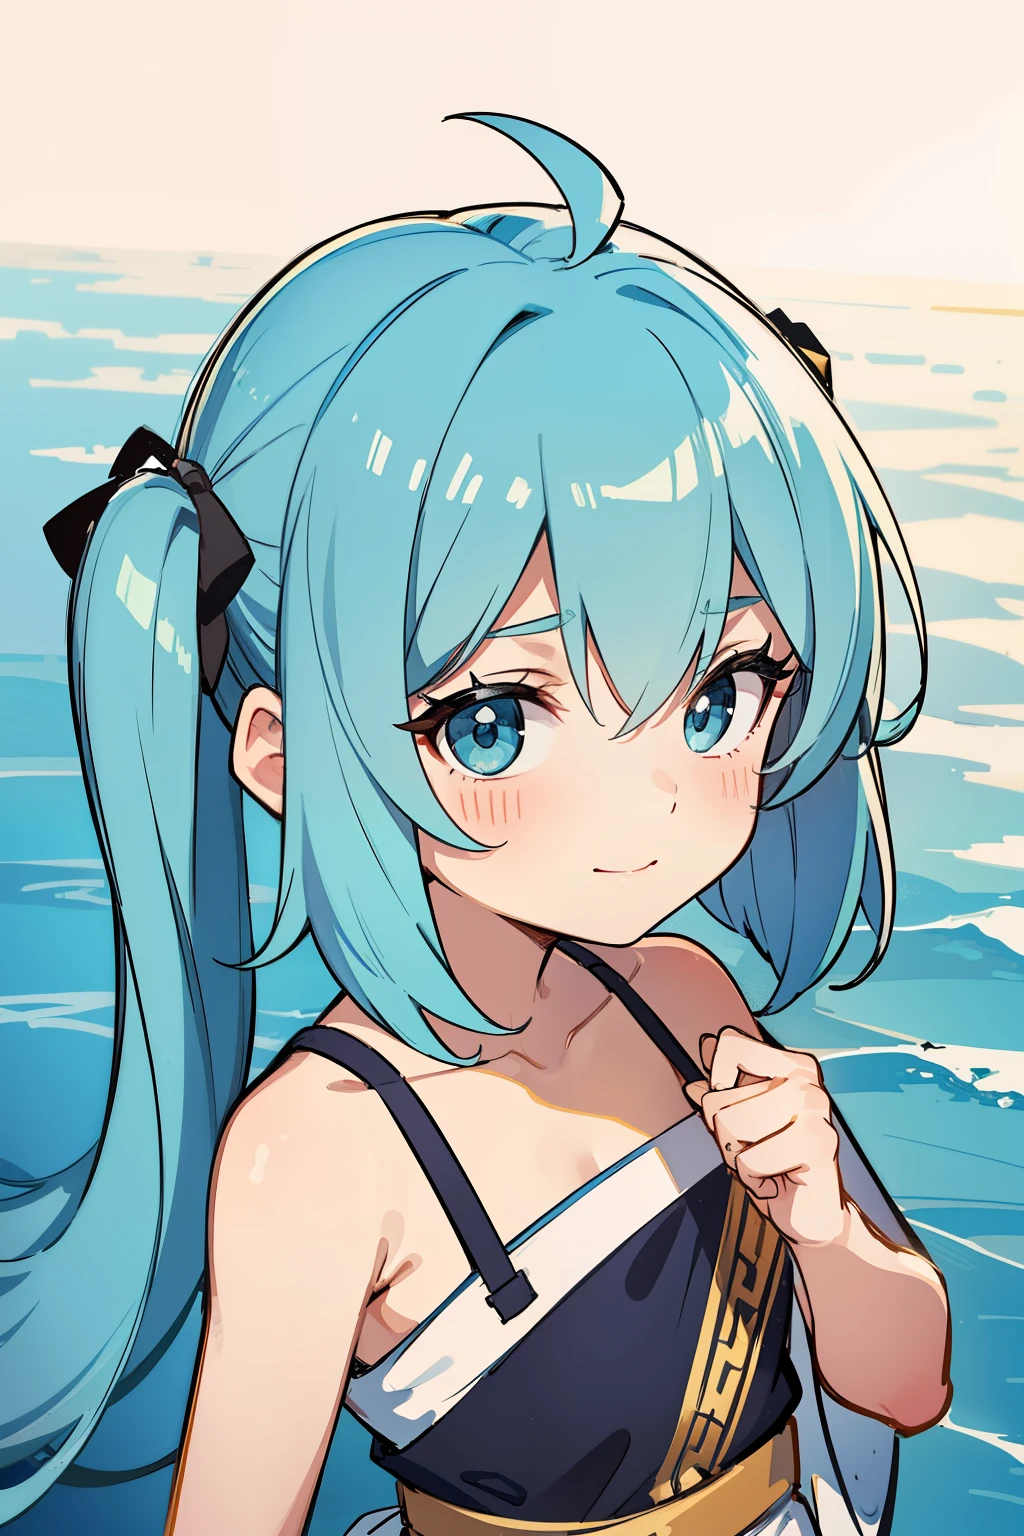 (high-quality, breathtaking),(expressive eyes, perfect face) 1girl, girl, solo, young kid, , chibi, toddler, long blue hair, green coloured eyes, stylised hair, gentle smile, medium length hair, loose hair, side bangs, curley hair, really spiky hair, spiked up hair, pigtails, looking at viewer, portrait, ancient greek clothes, blue black and white tunic, white Chlamys, sleeveless, greek, blue and gold sash, ocean background, ribbon accessories in hair, slightly narrow eyes, baby face, baby body, , small head, 36½ inches tall, chibi art style